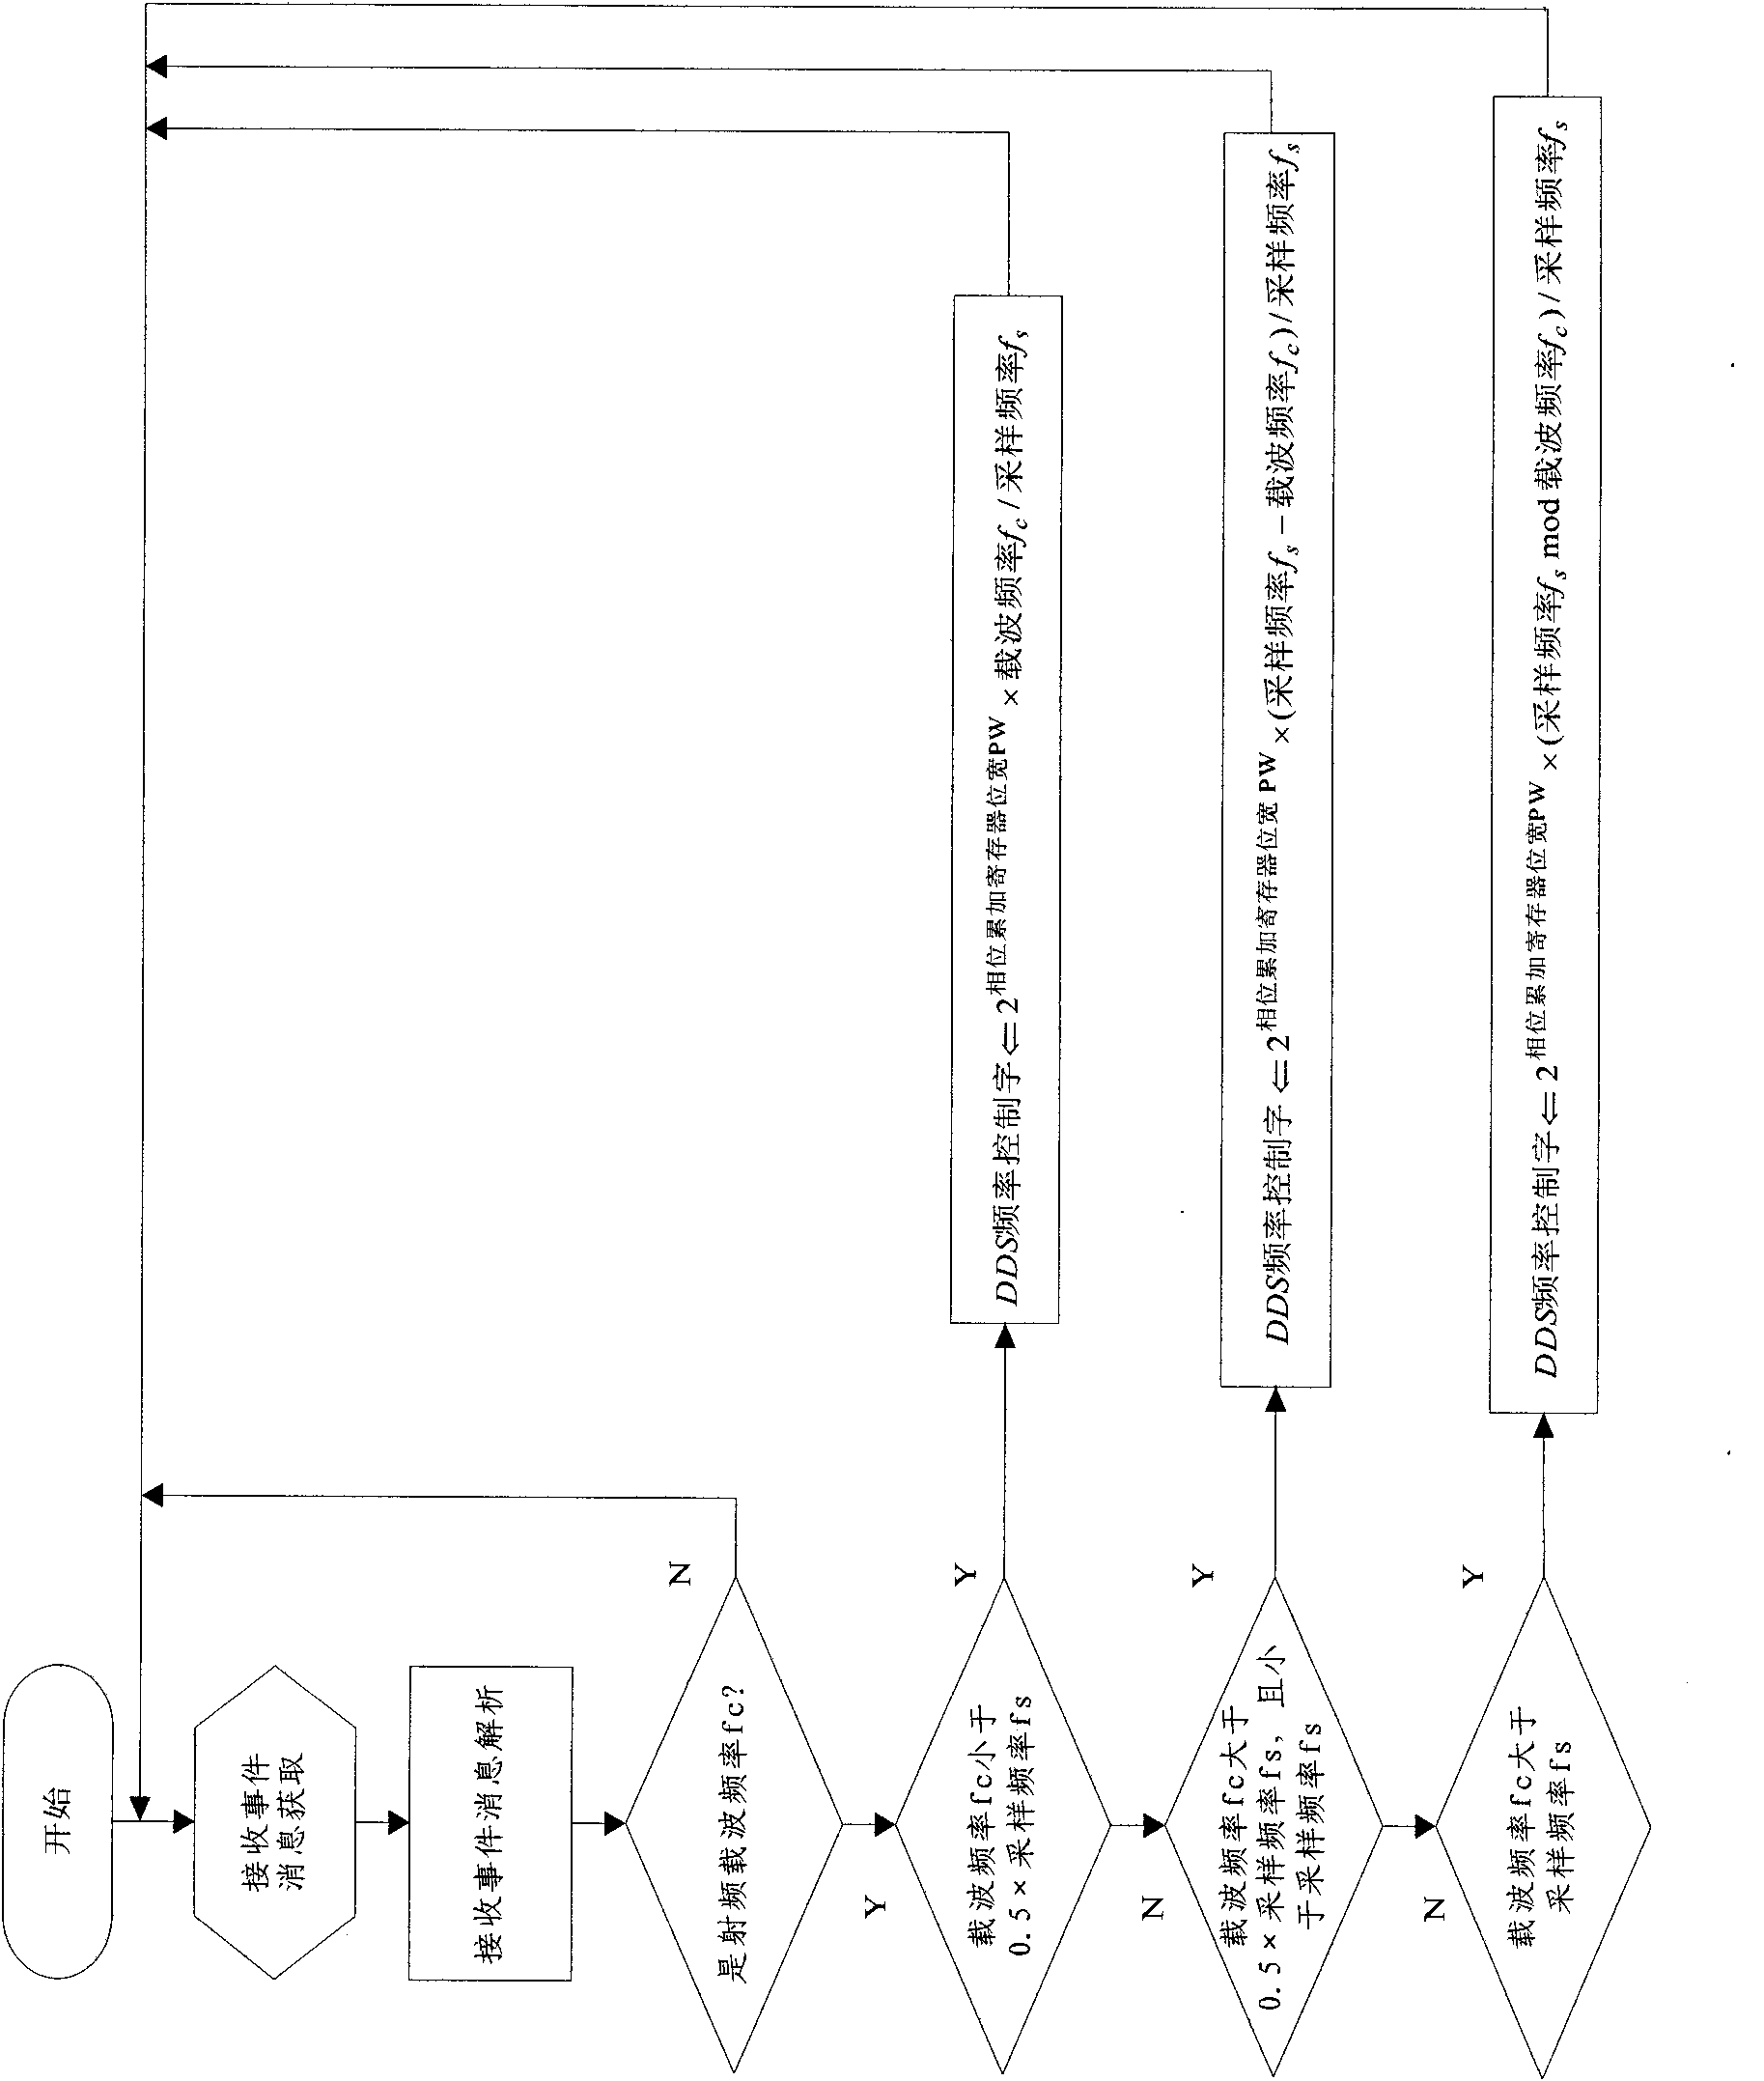 Device and method for realizing broadband digital magnetic resonance radio frequency receiving